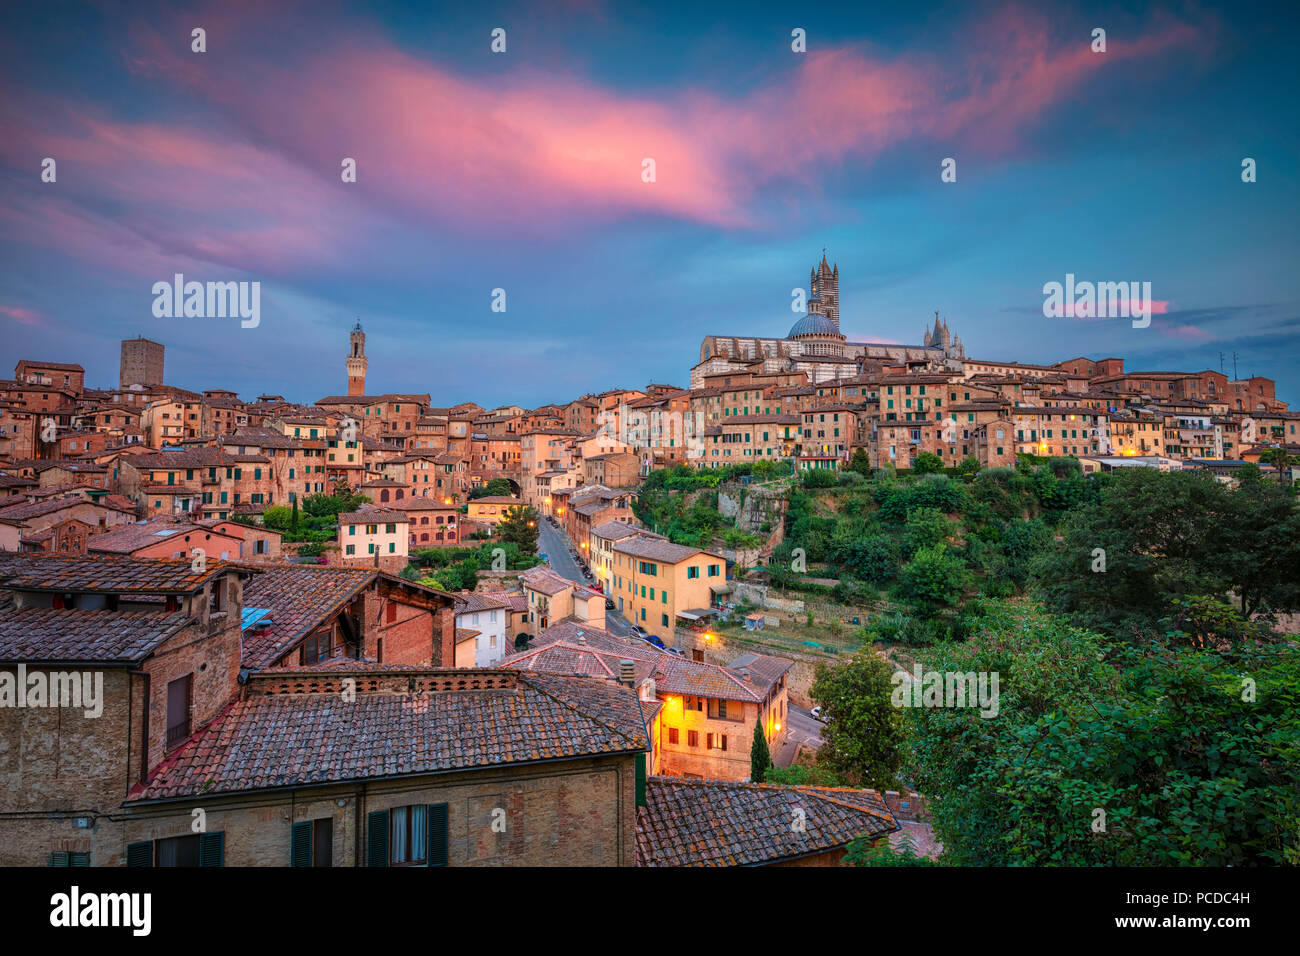 Siena. Cityscape aerial image of medieval city of Siena, Italy during sunset. Stock Photo